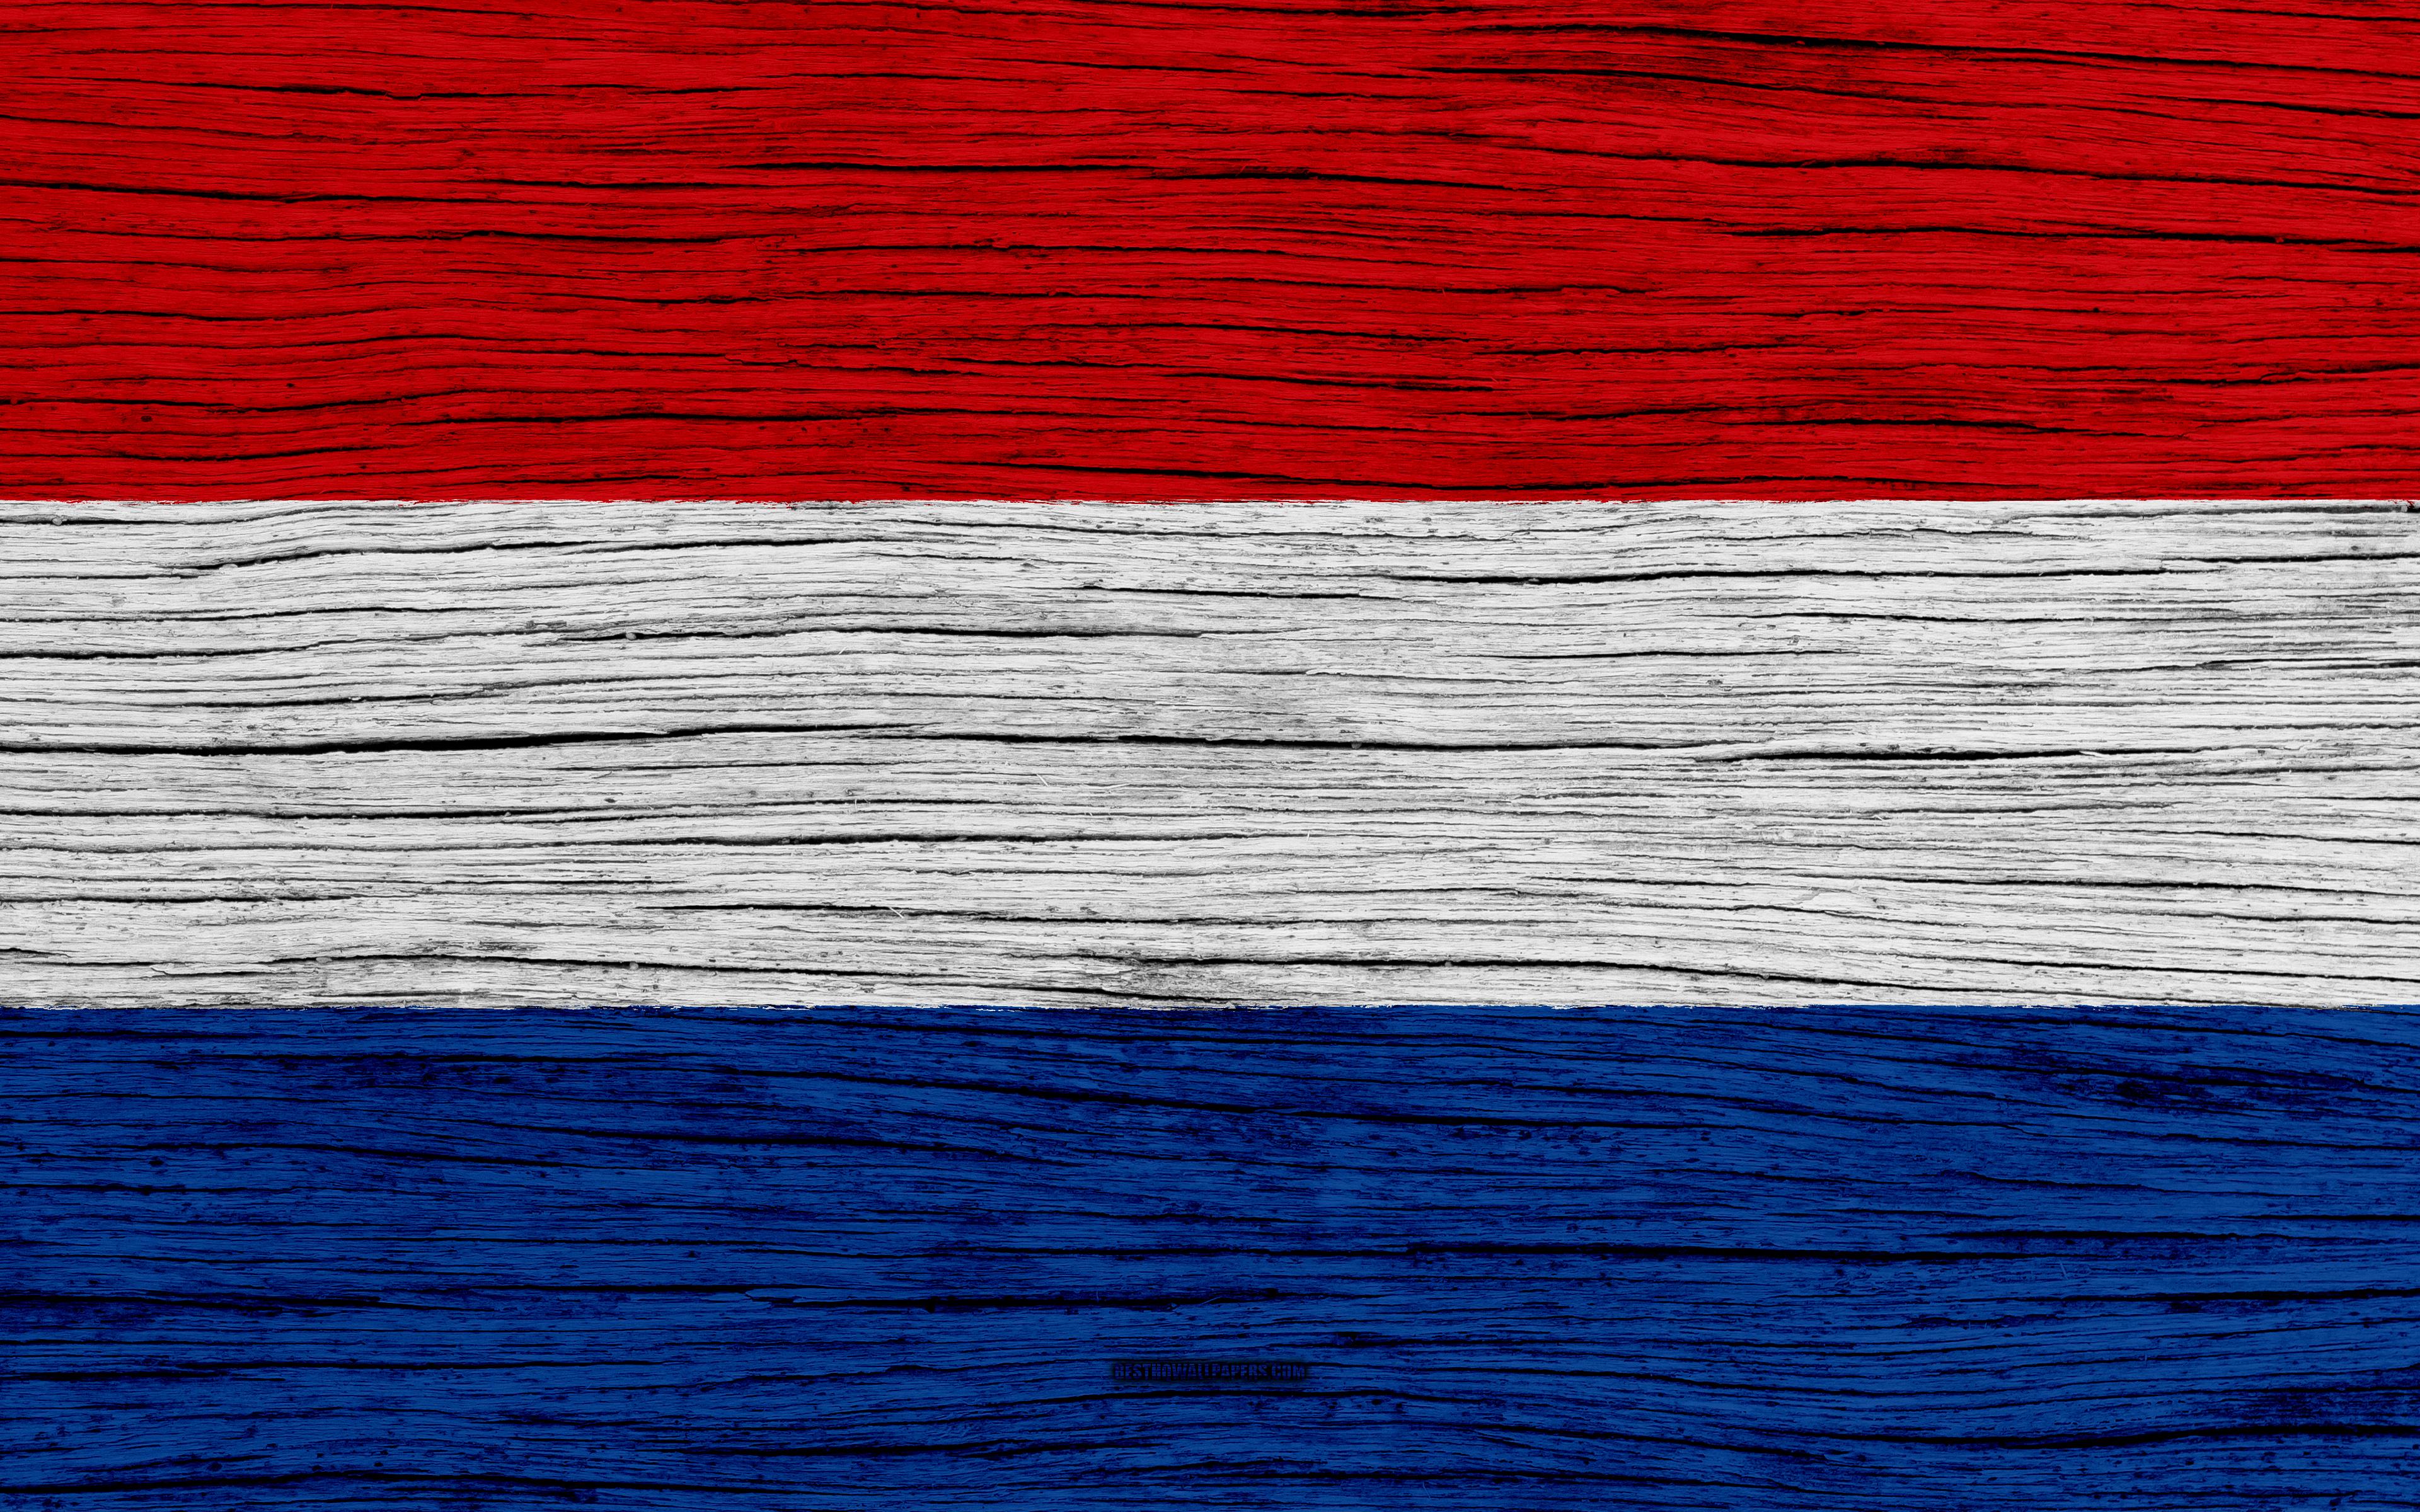 Download wallpaper Flag of Netherlands, 4k, Europe, wooden texture, Dutch flag, national symbols, Netherlands flag, art, Netherlands for desktop with resolution 3840x2400. High Quality HD picture wallpaper